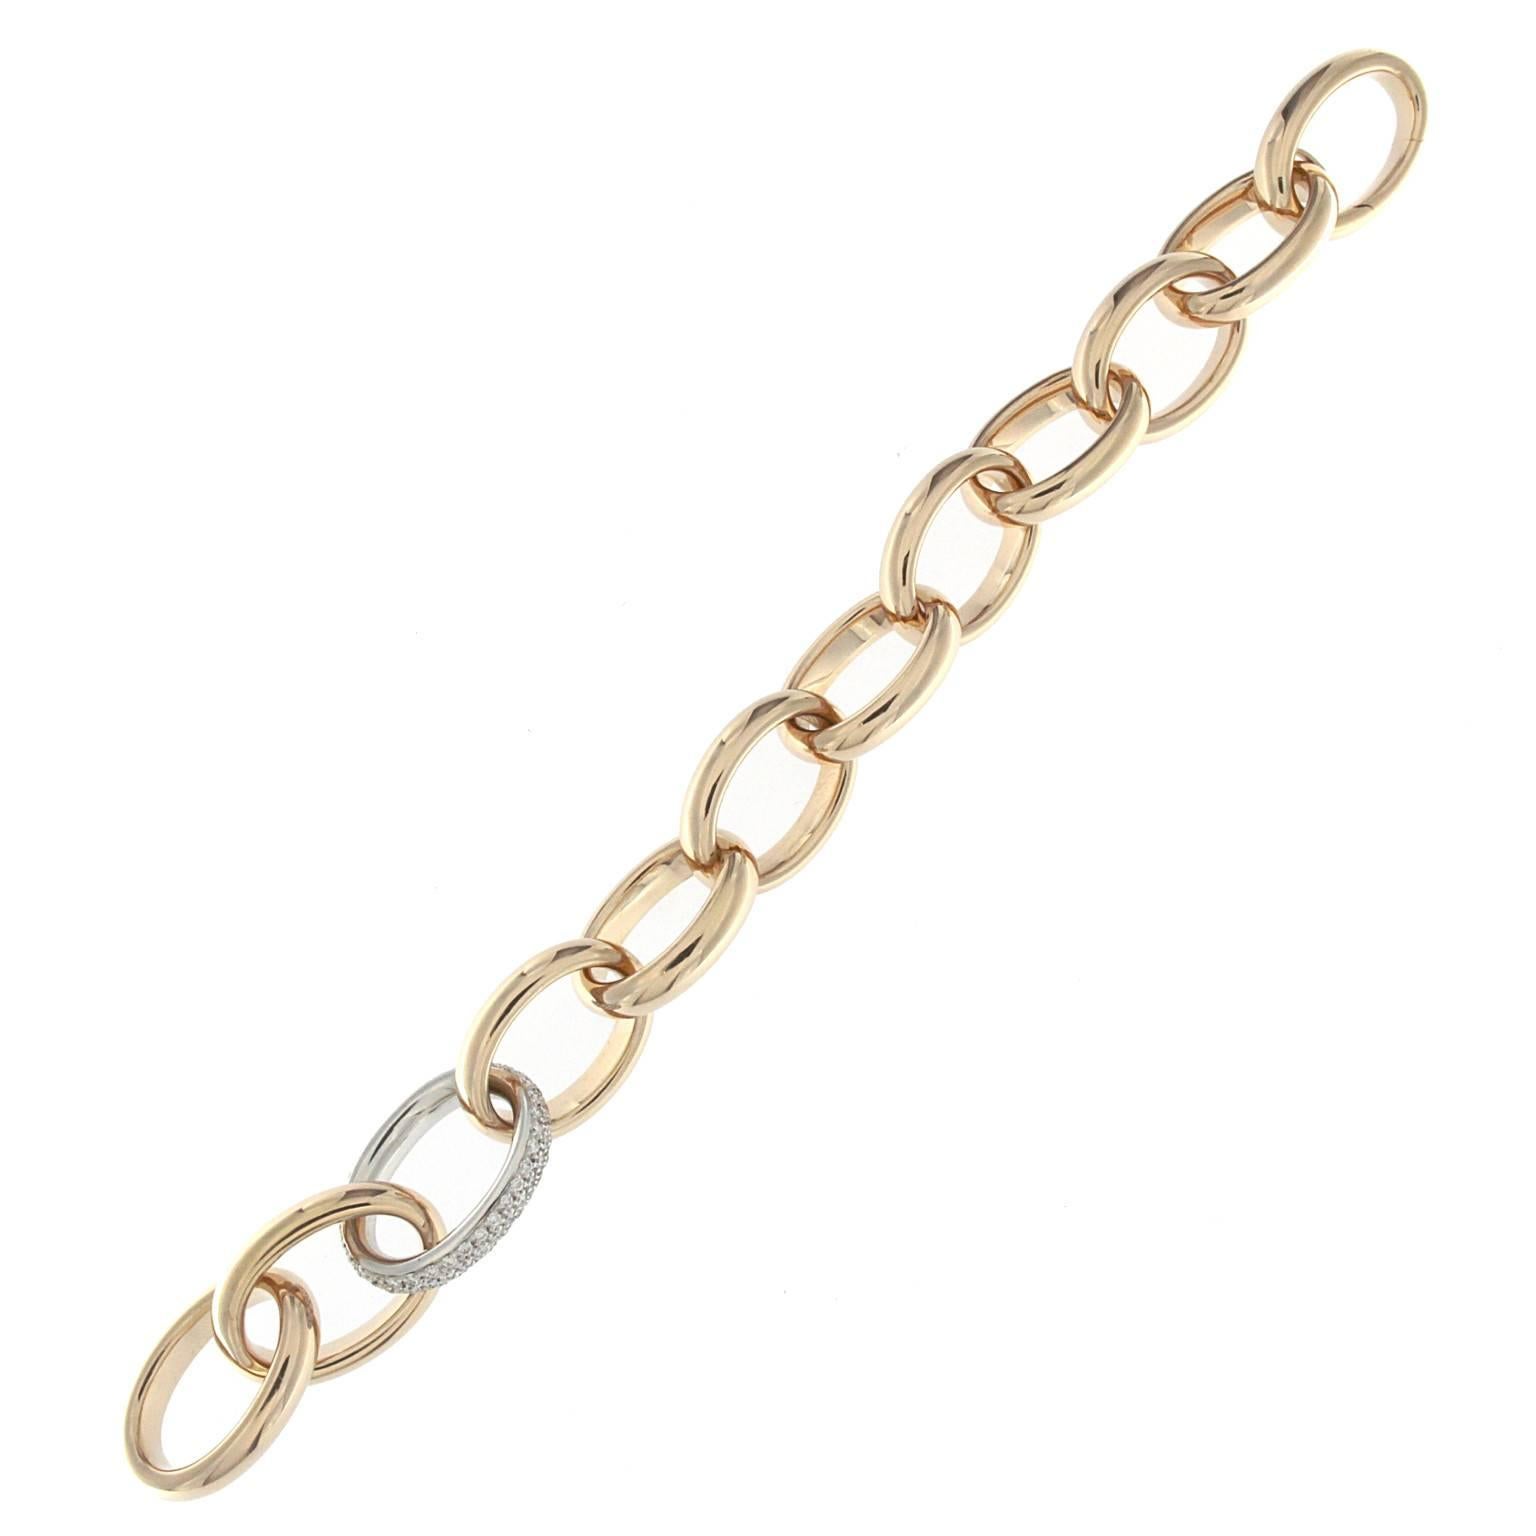 Forzatina bracelet in 18 kt pink gold and white diamonds 

The total lengh is 21.00 cm
the total weight of the gold is 31.80
the total weight of the diamonds is ct 1.2 (color HG clarity VVS1)
STAMP: 10 MI ITALY 750

